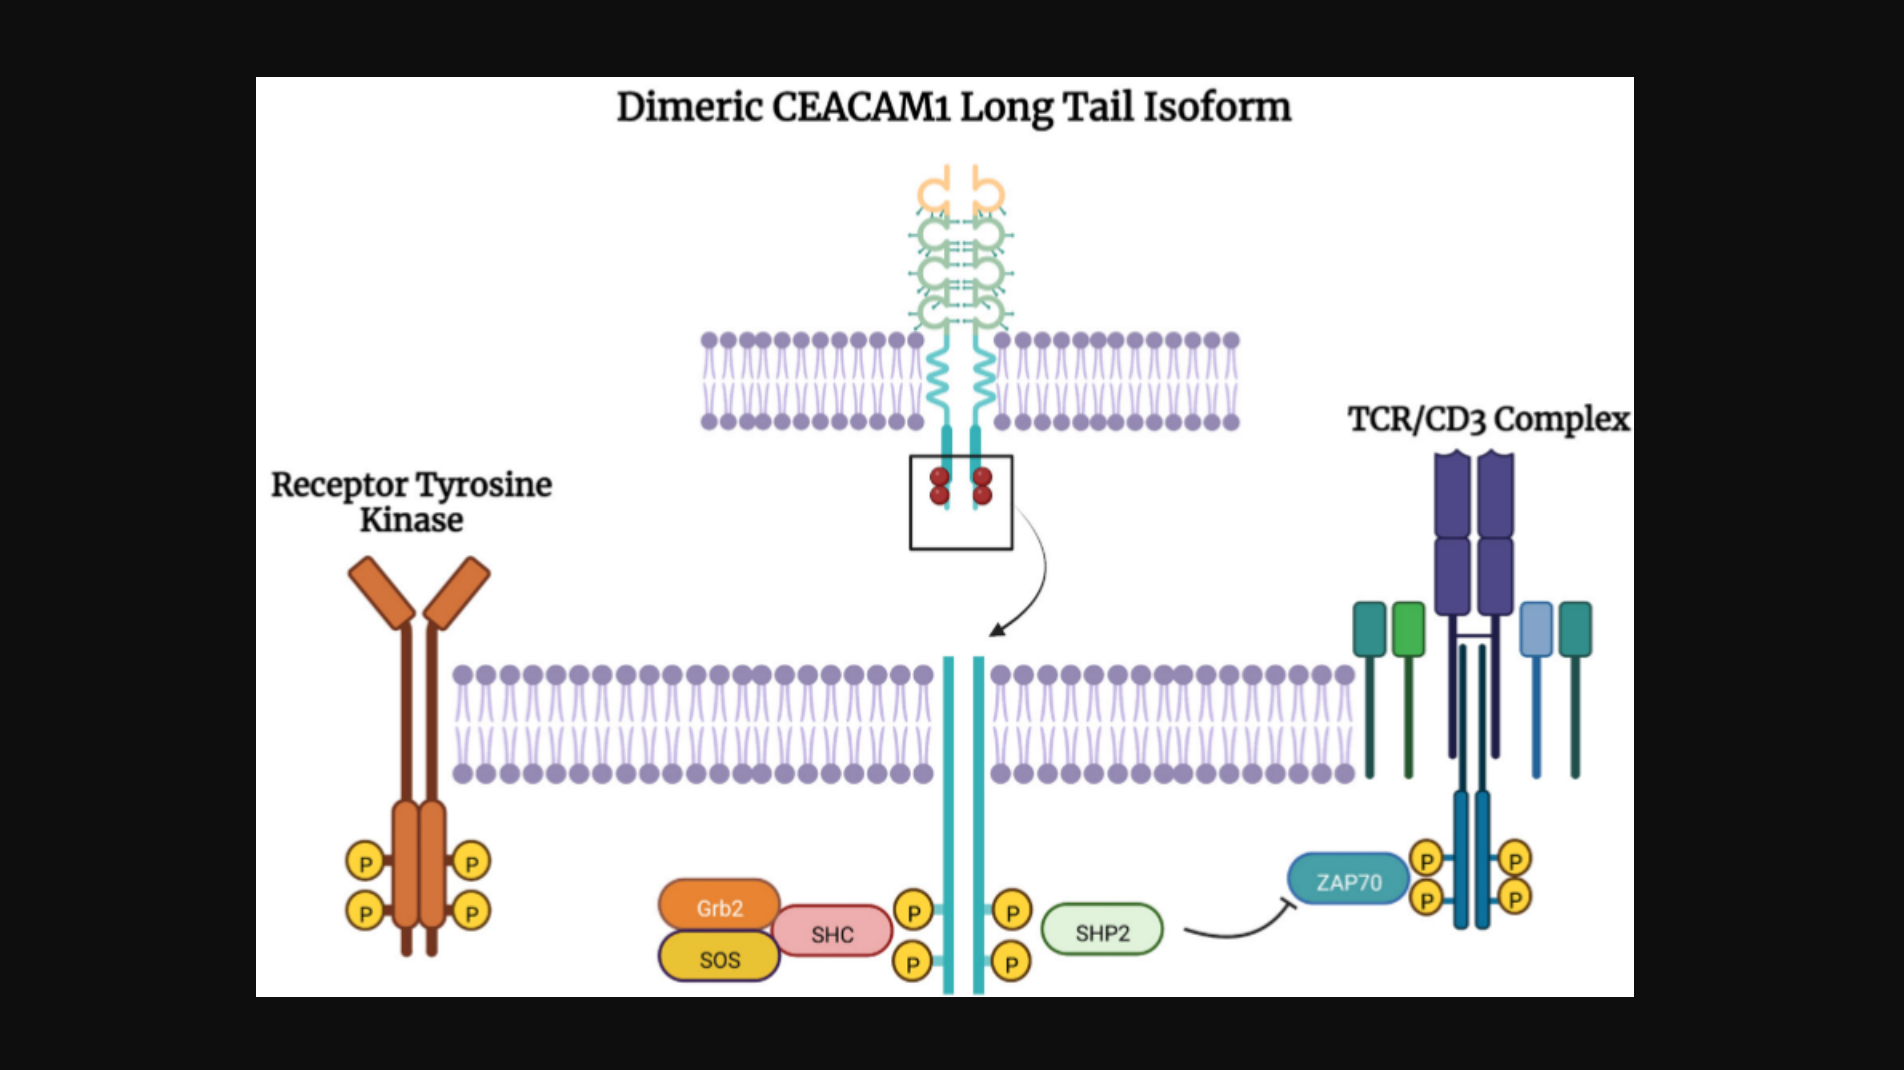 Figure 4: Signaling of dimeric CEACAM1 long tail isoform in epithelial cells and T cells.